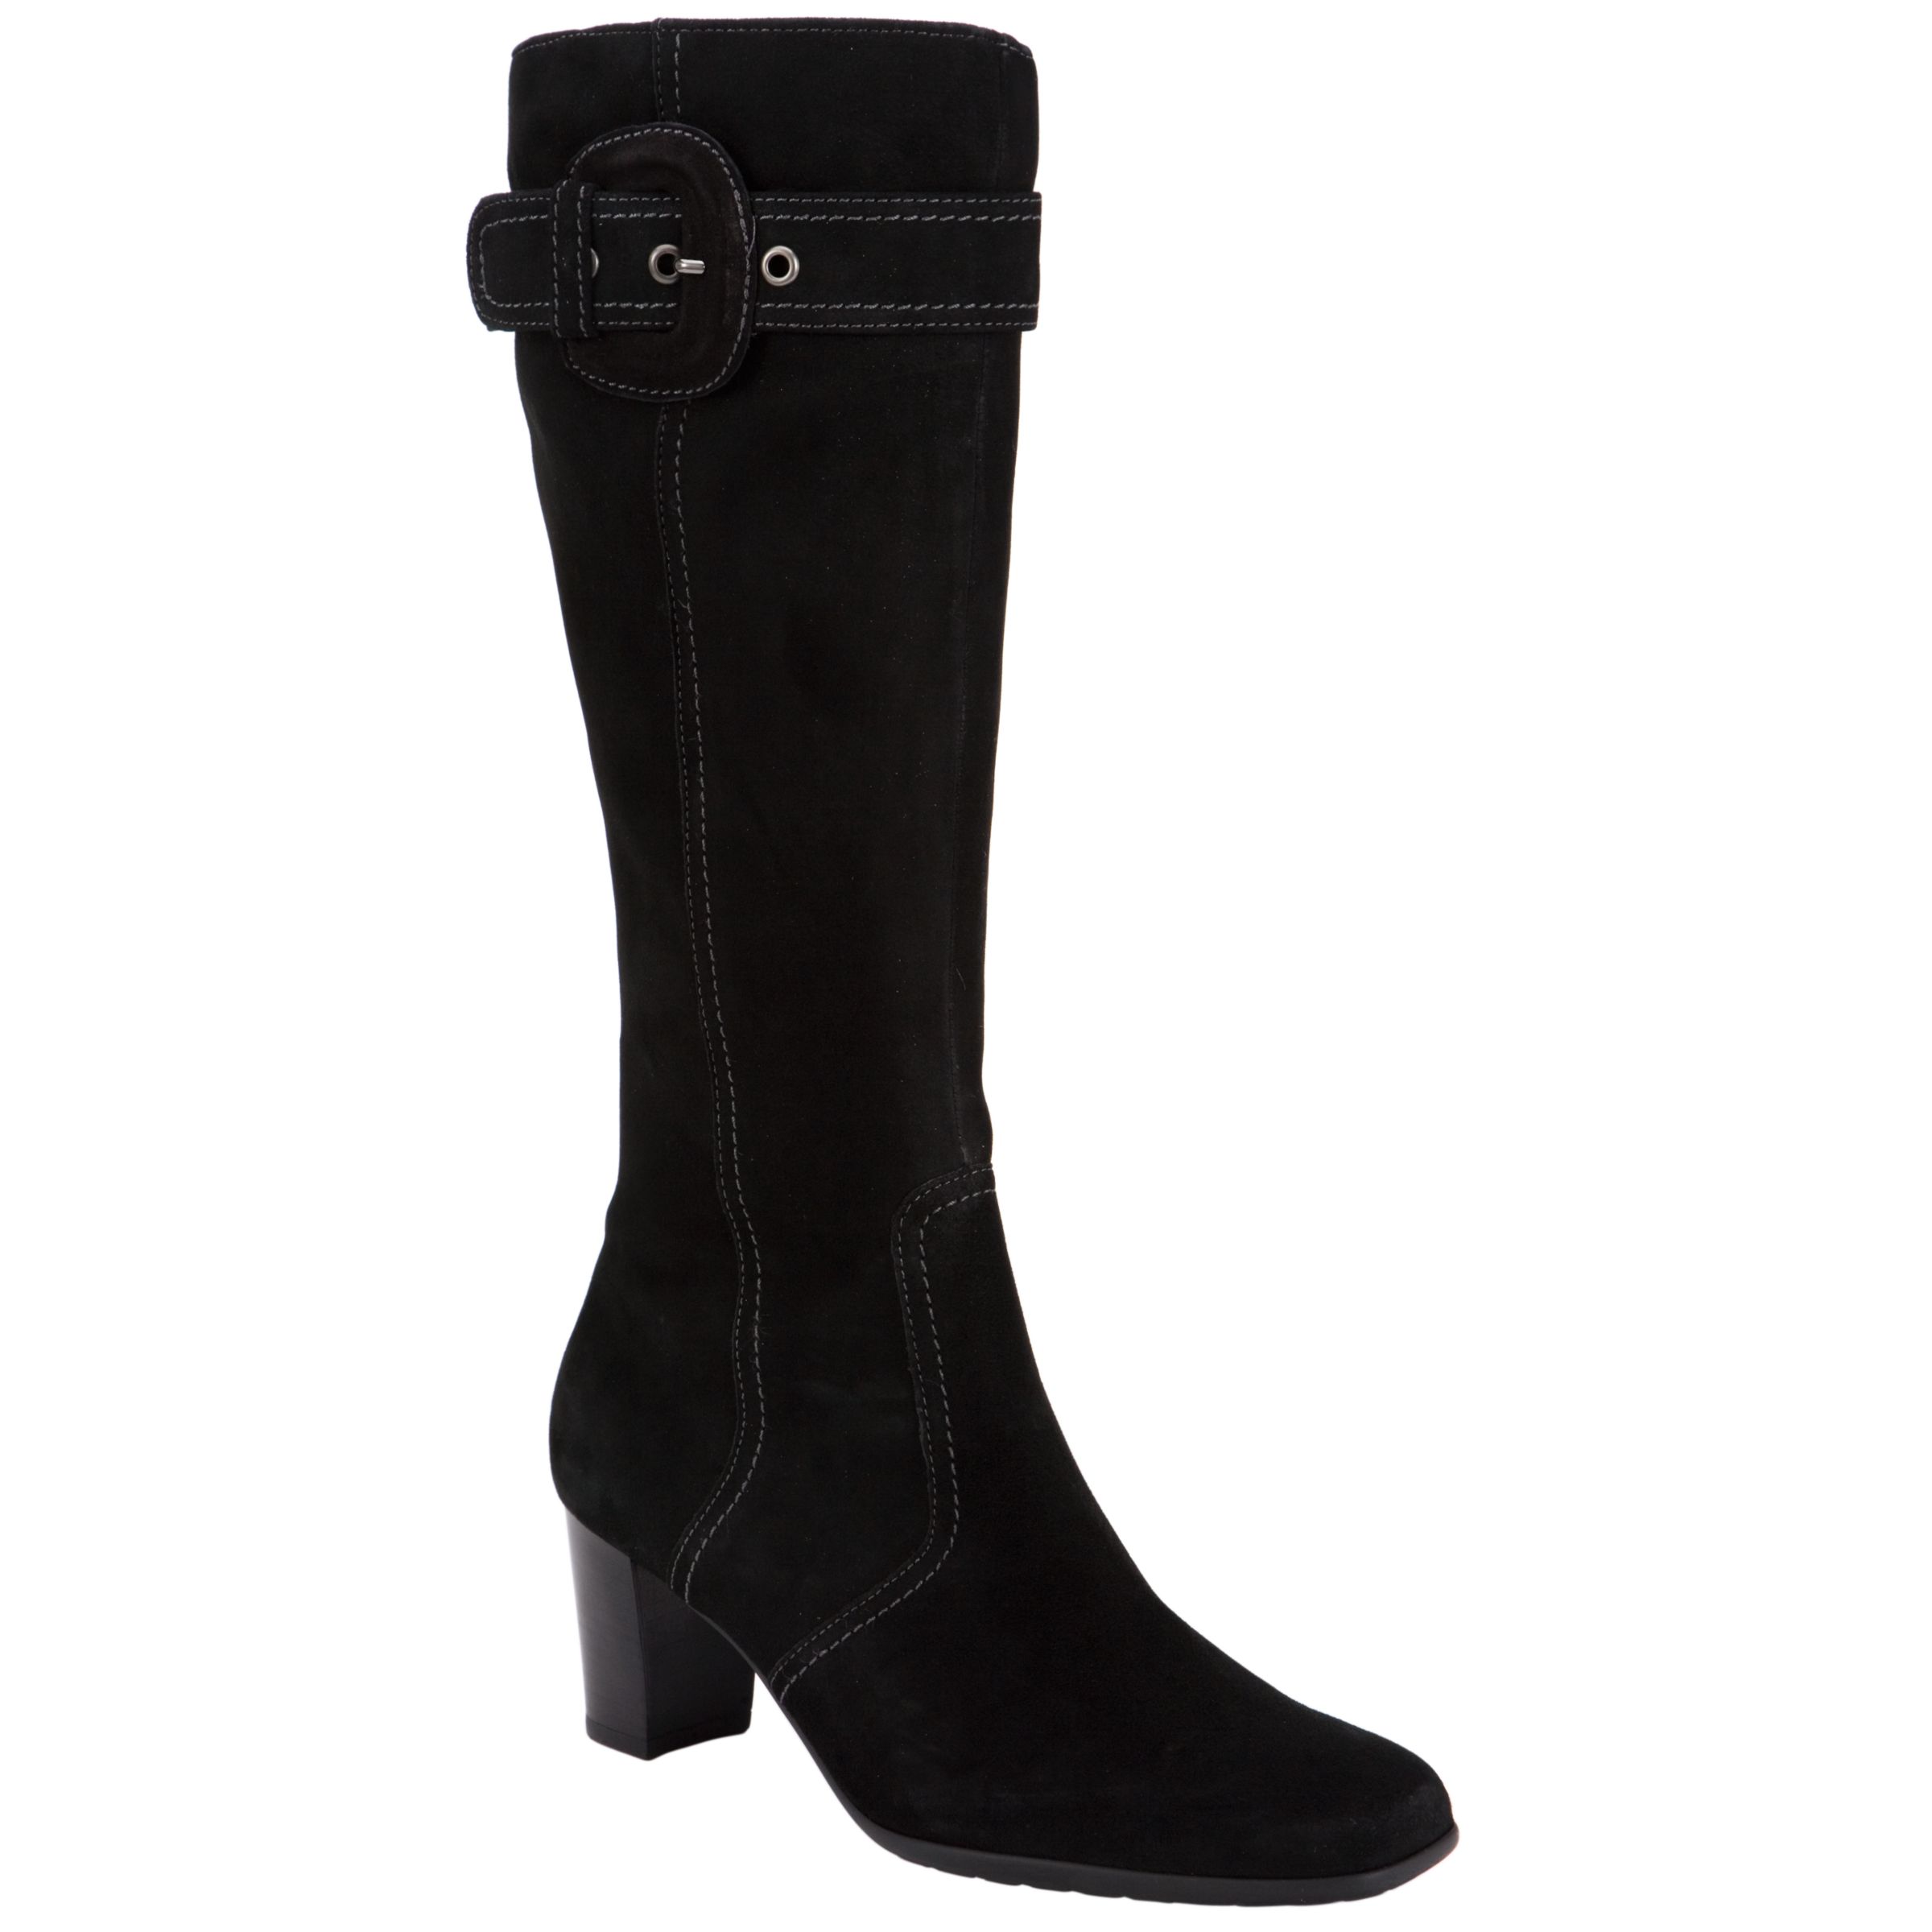 Gabor Amberly Suede Knee Boots, Black at John Lewis